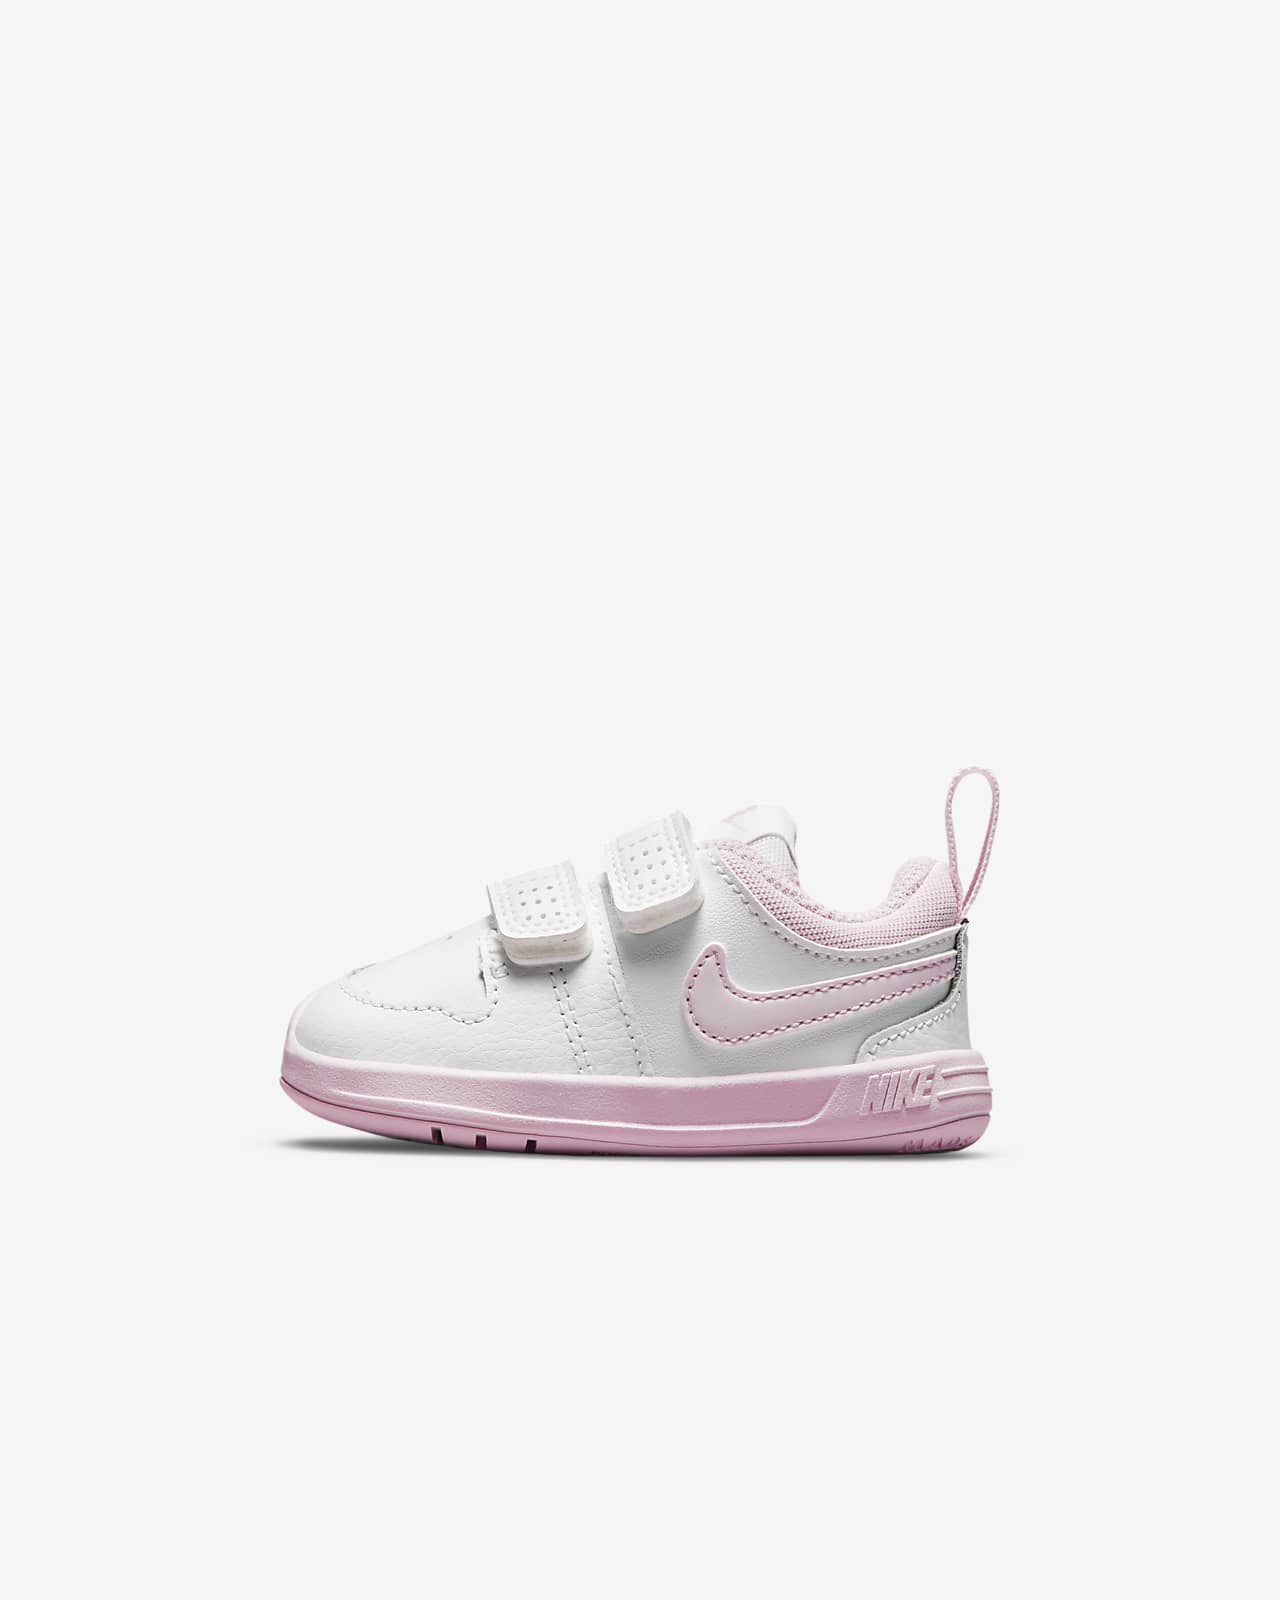 Nike Pico 5 Infant/Toddler Shoes